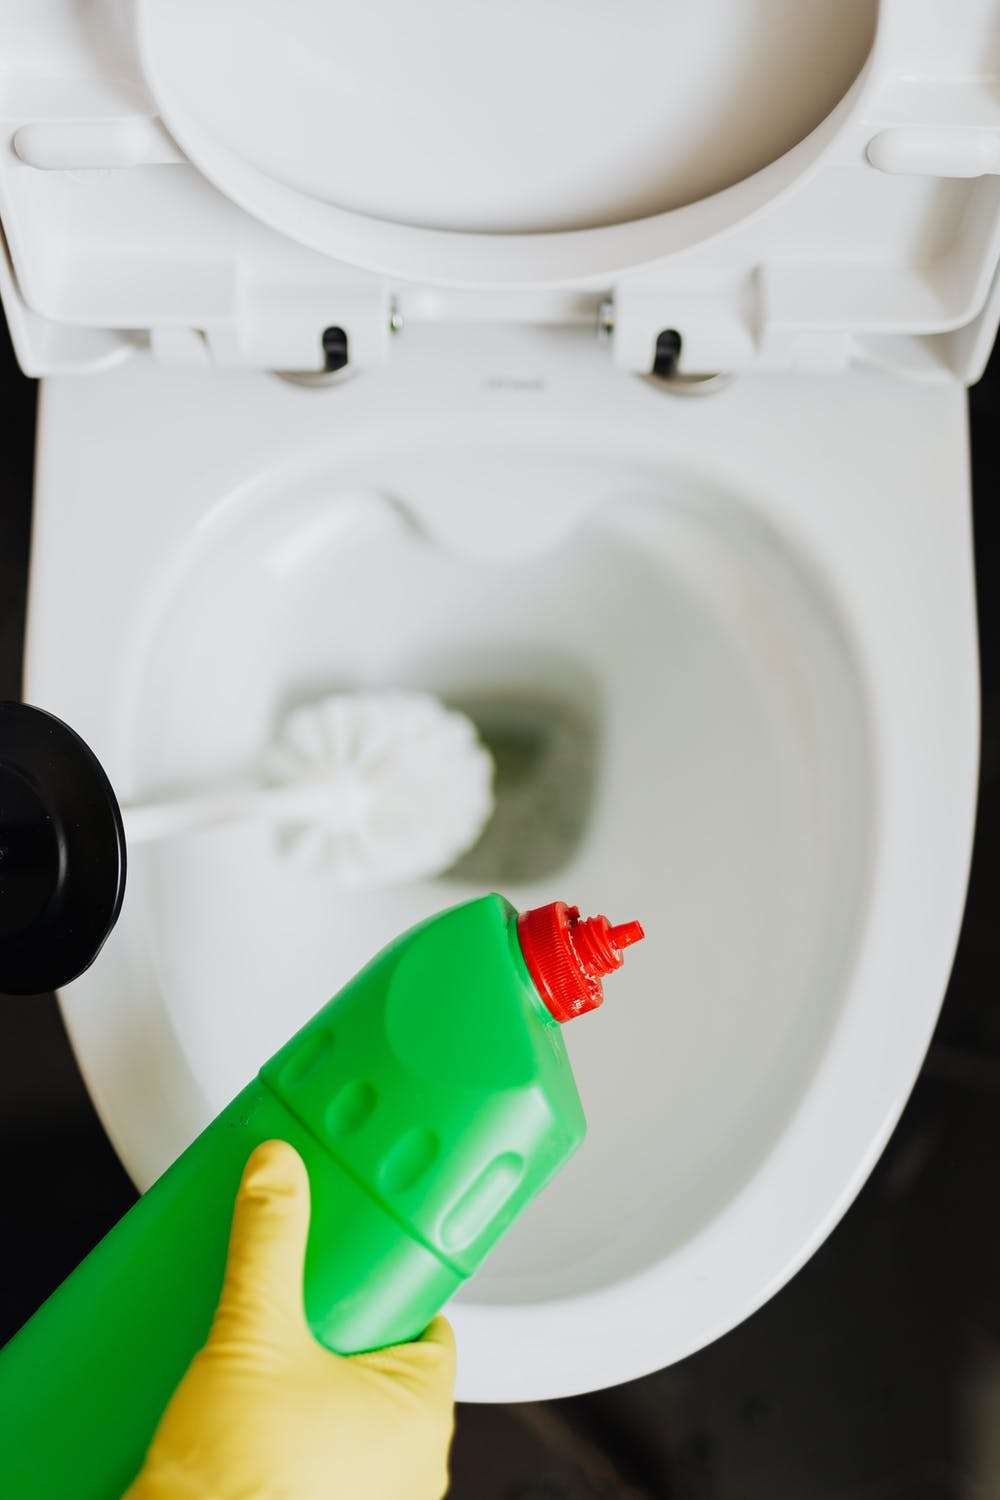 4 Possible Reasons Why Your Toilet Suddenly Overflowed